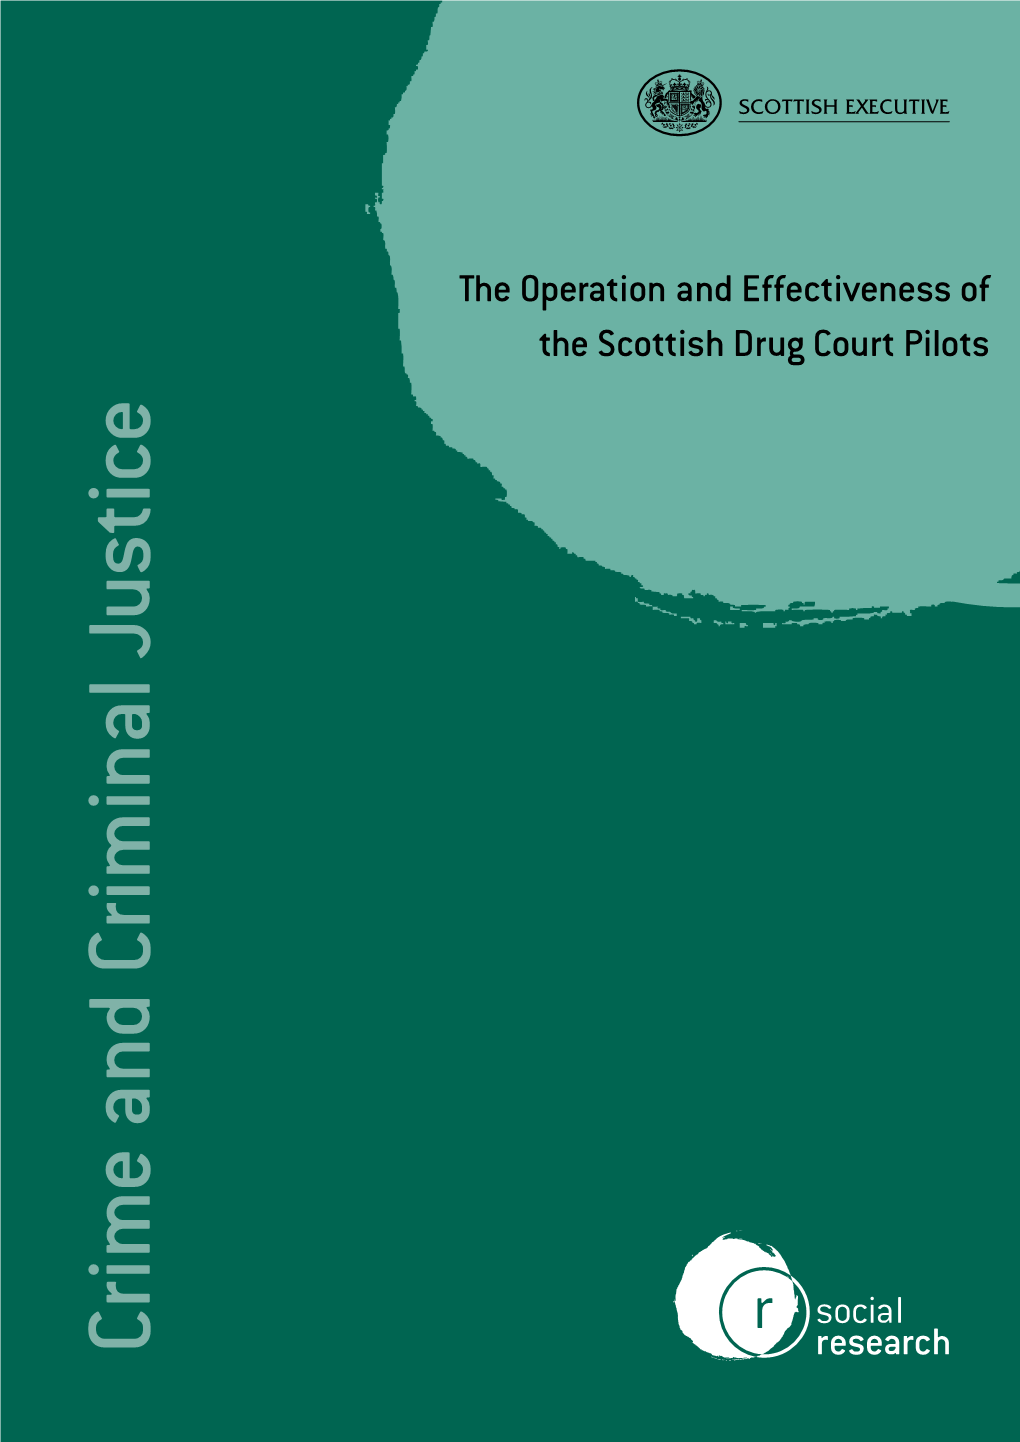 The Operation and Effectiveness Ofthe Scottish Drug Court Pilots